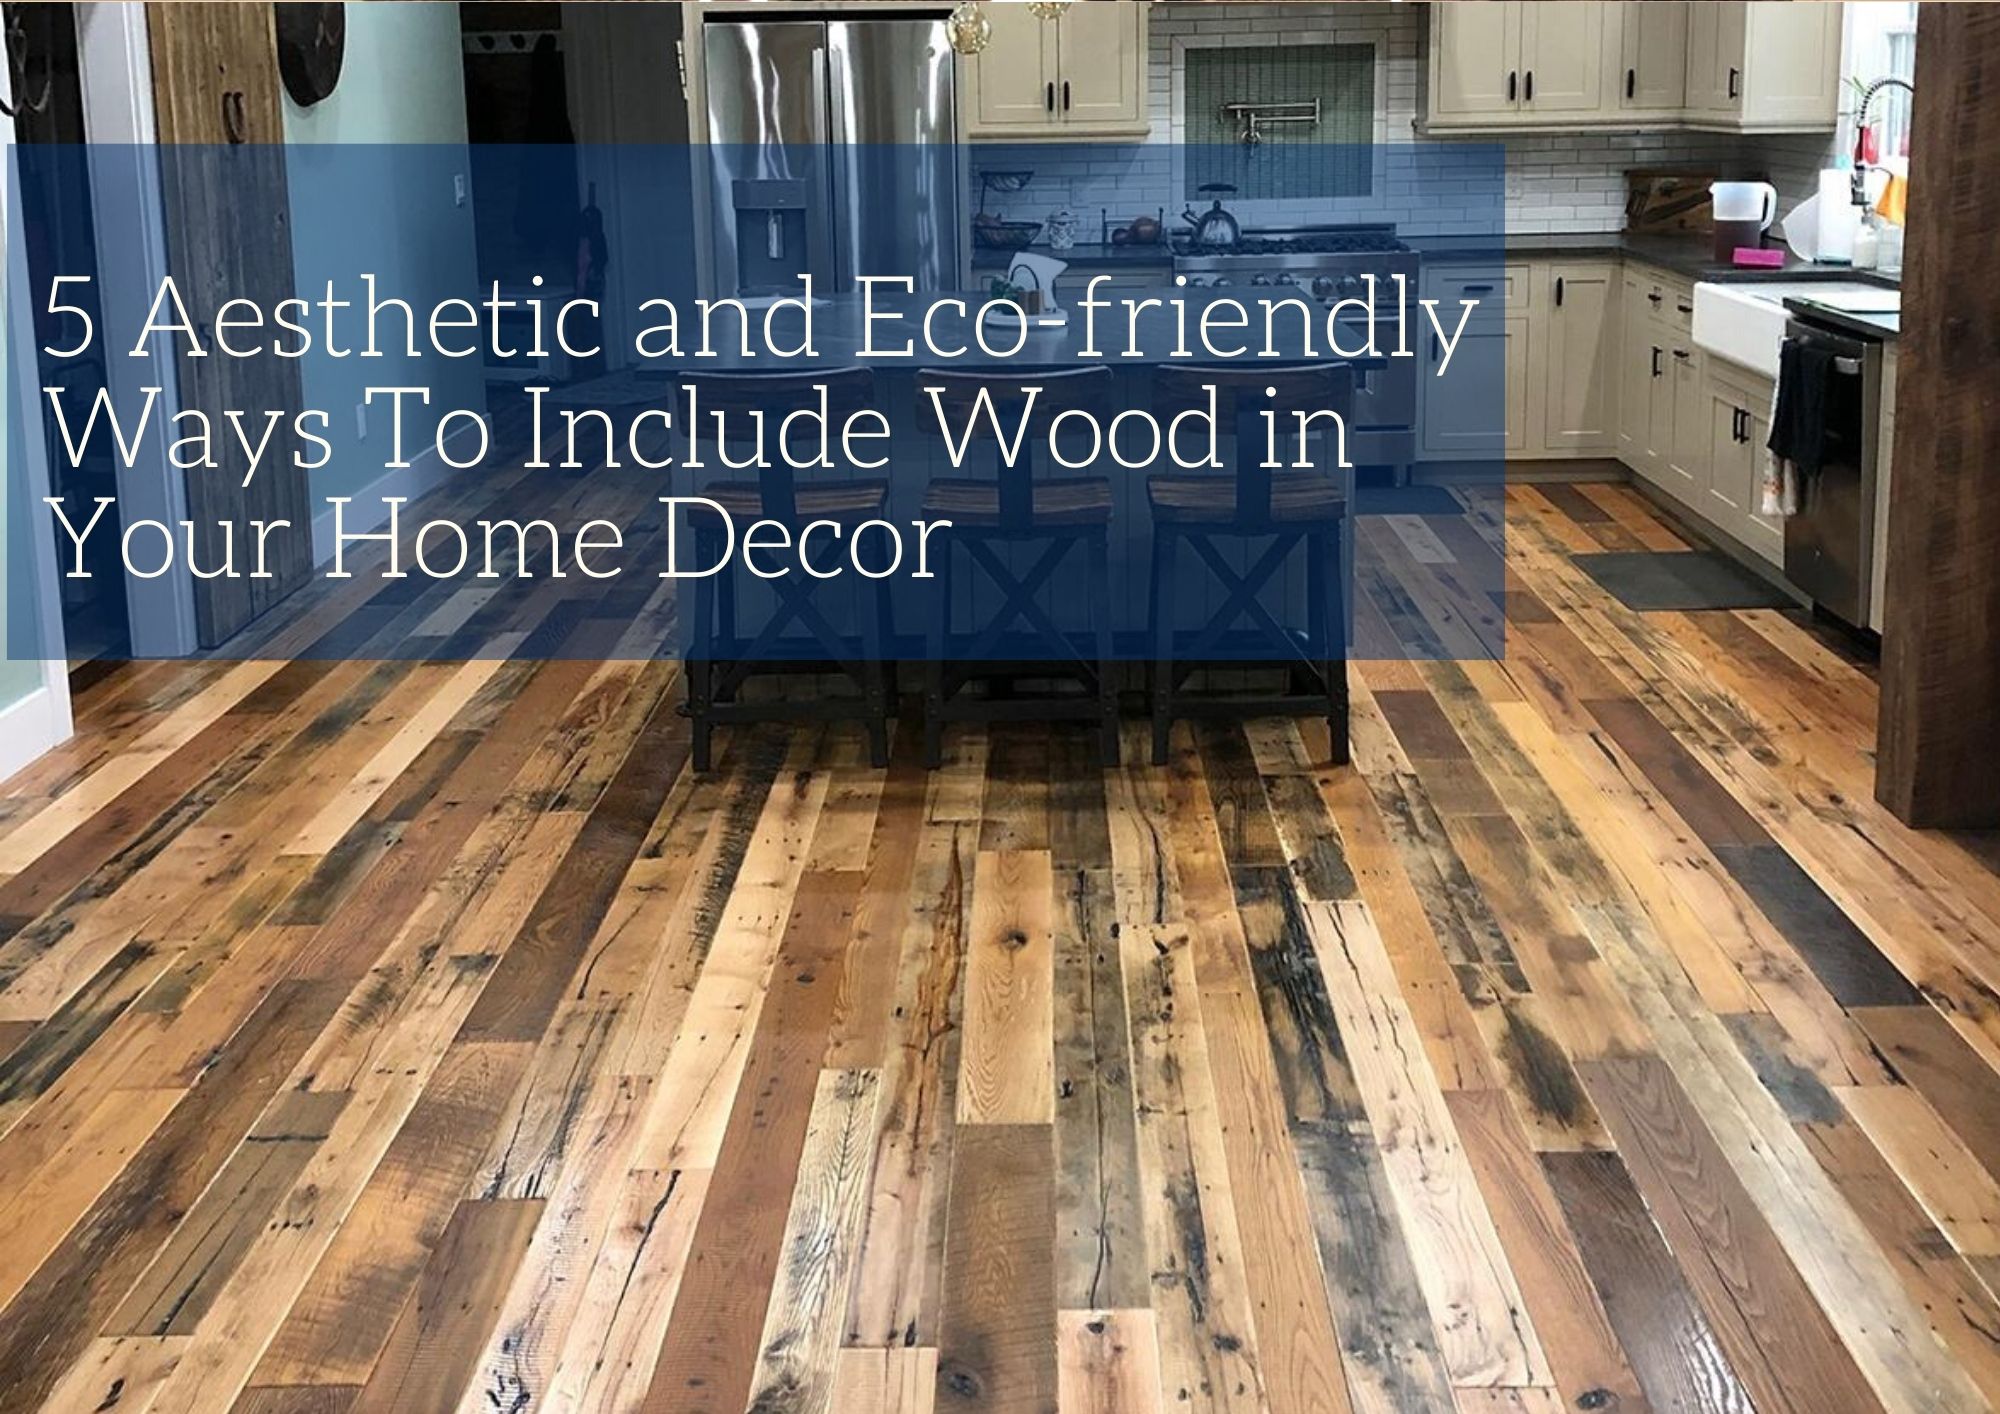 5 Aesthetic and Eco-friendly Ways To Include Wood in Your Home Decor